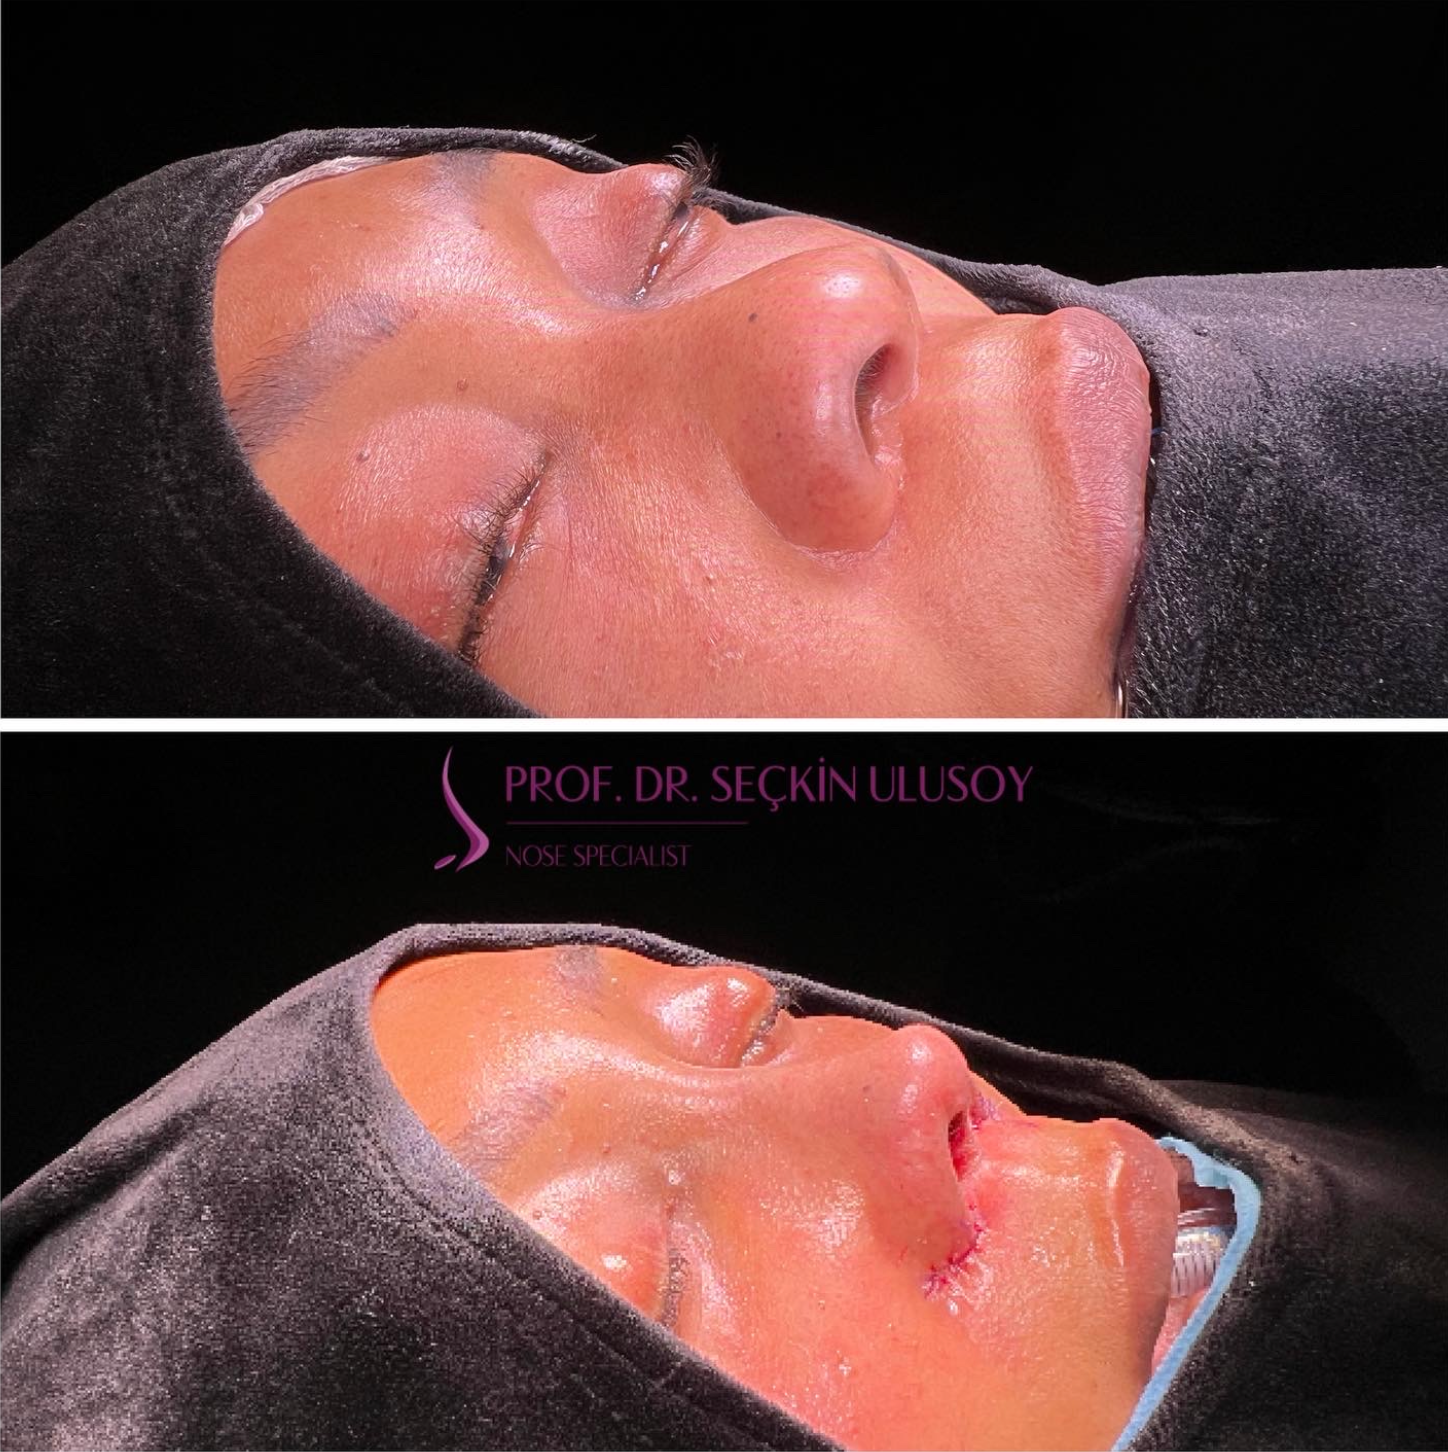 Ethnic nose job with Alar base reduction surgery